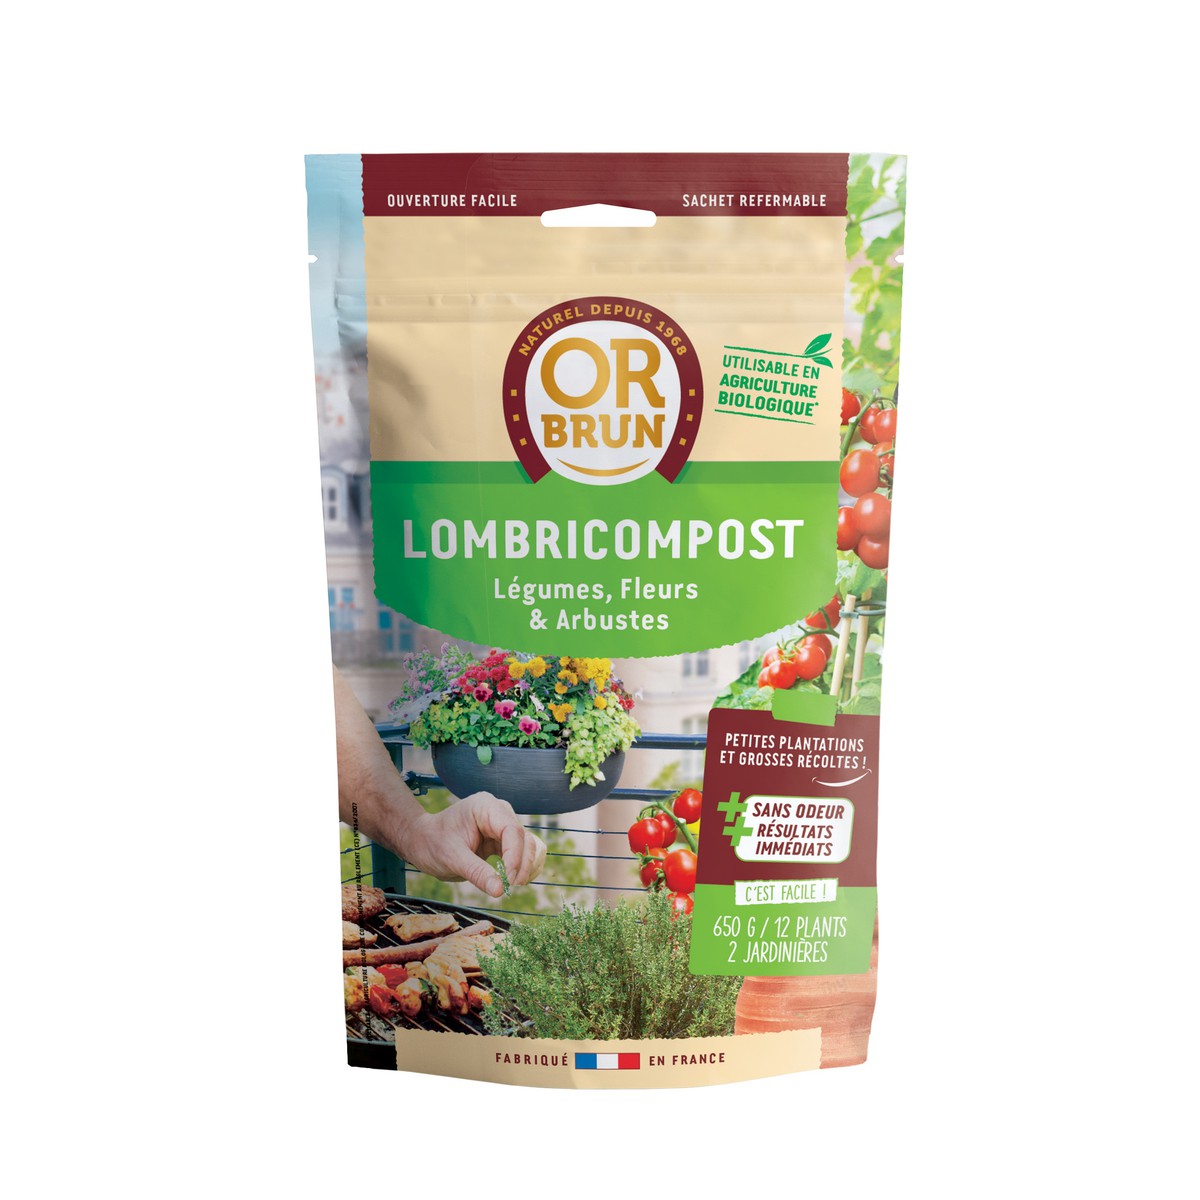 Or brun  Lombricompost 650G  